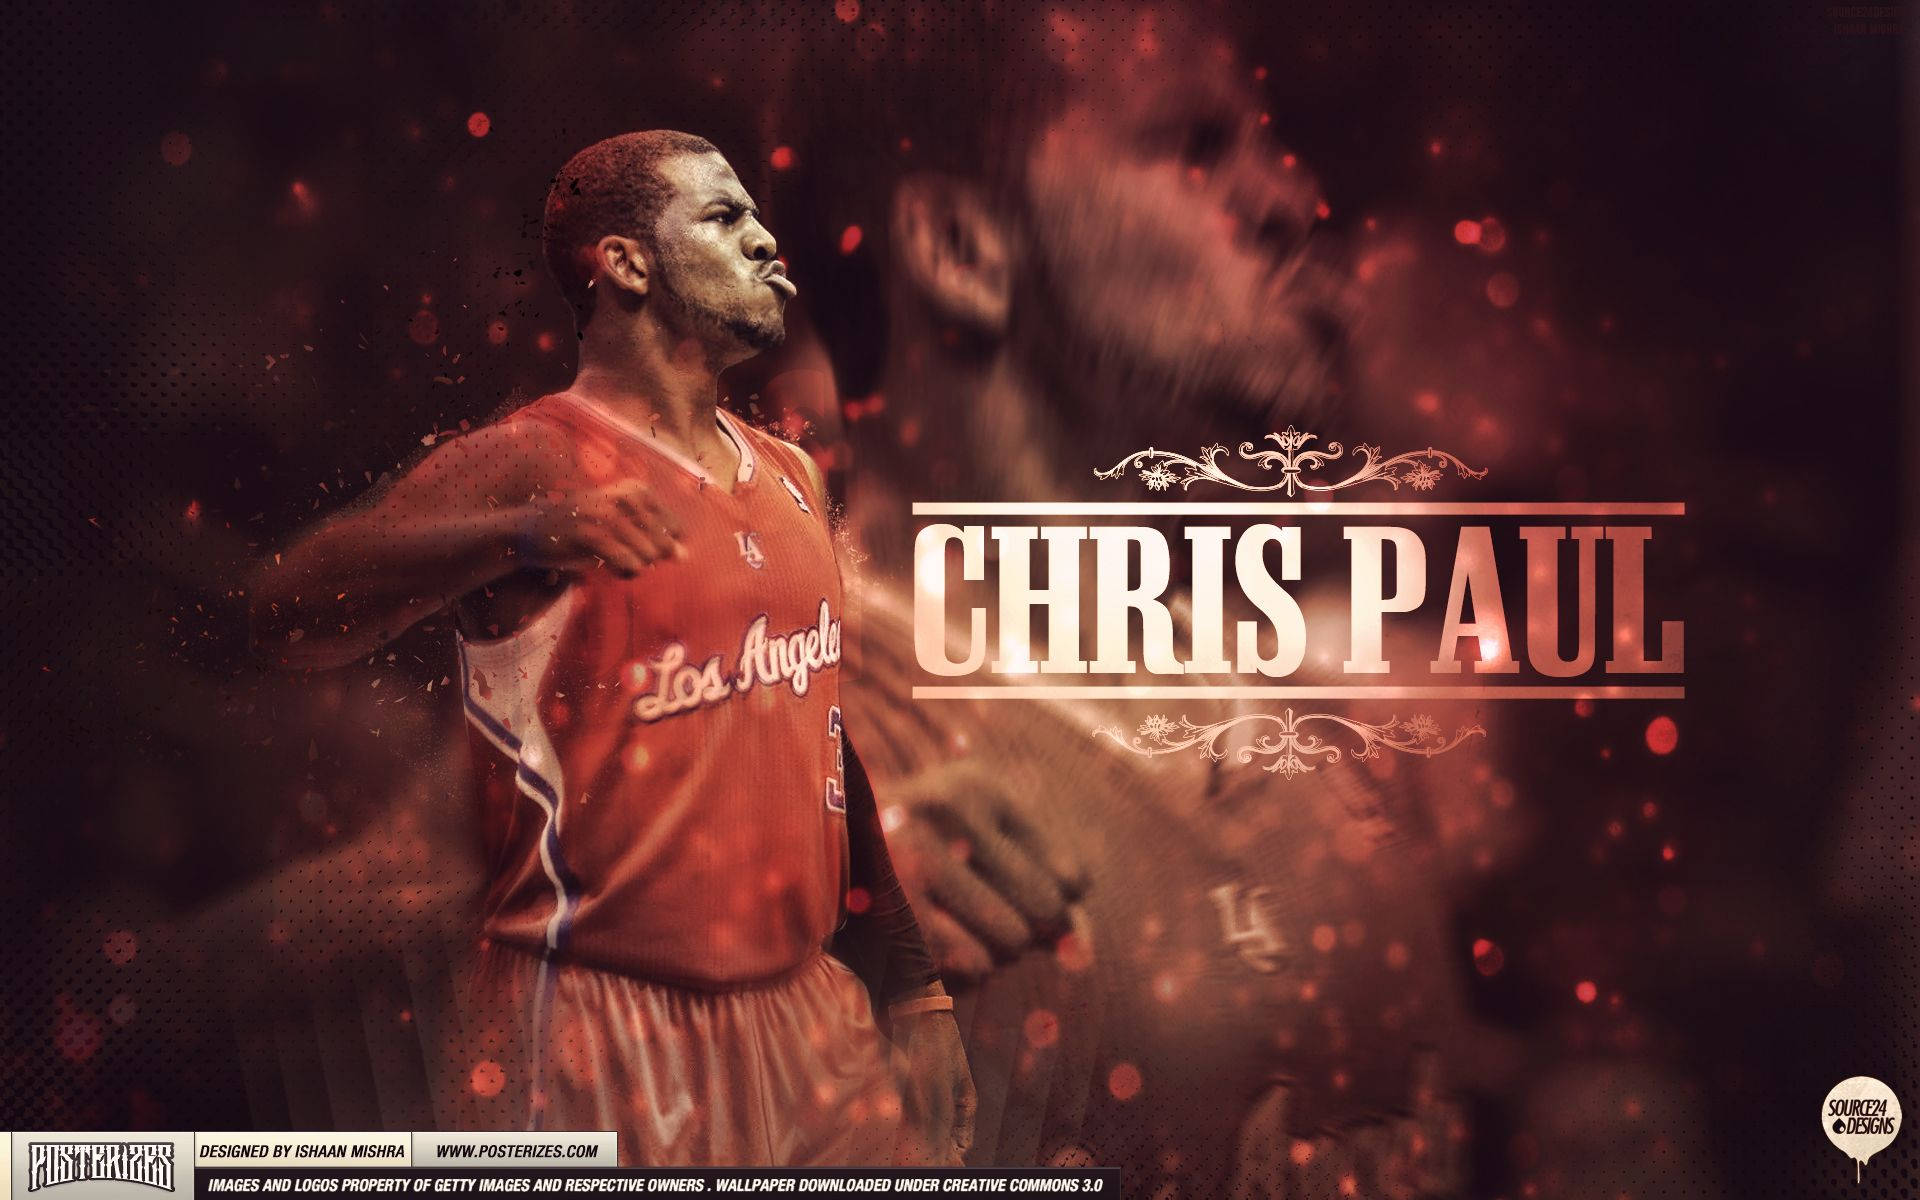 Chris Paul Red La Clippers Jersey Background